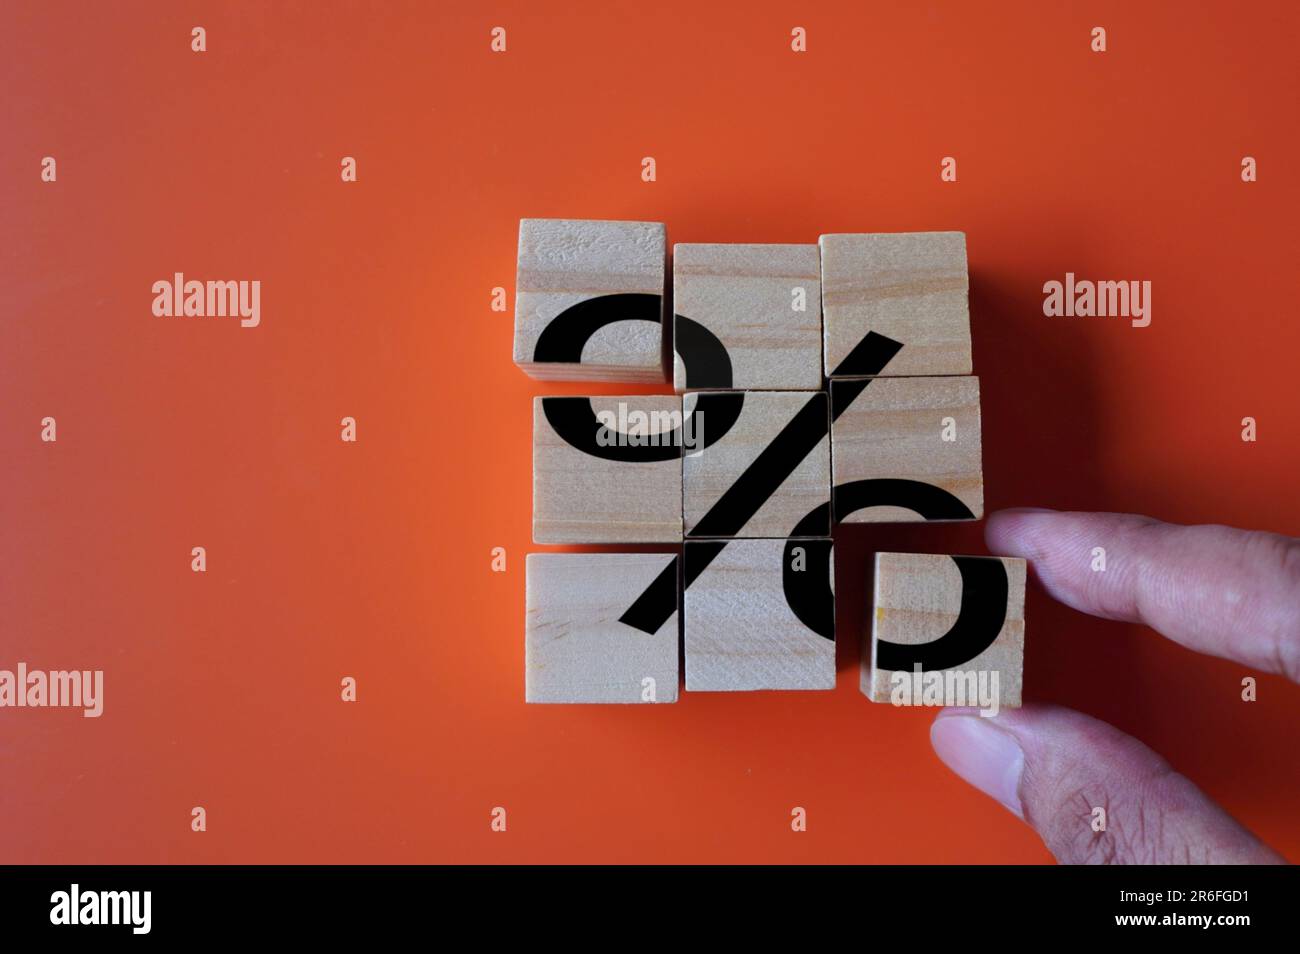 Hand arrange wooden cubes with percentage sign. Debt restructuring, loan refinancing and pay off debts concept Stock Photo